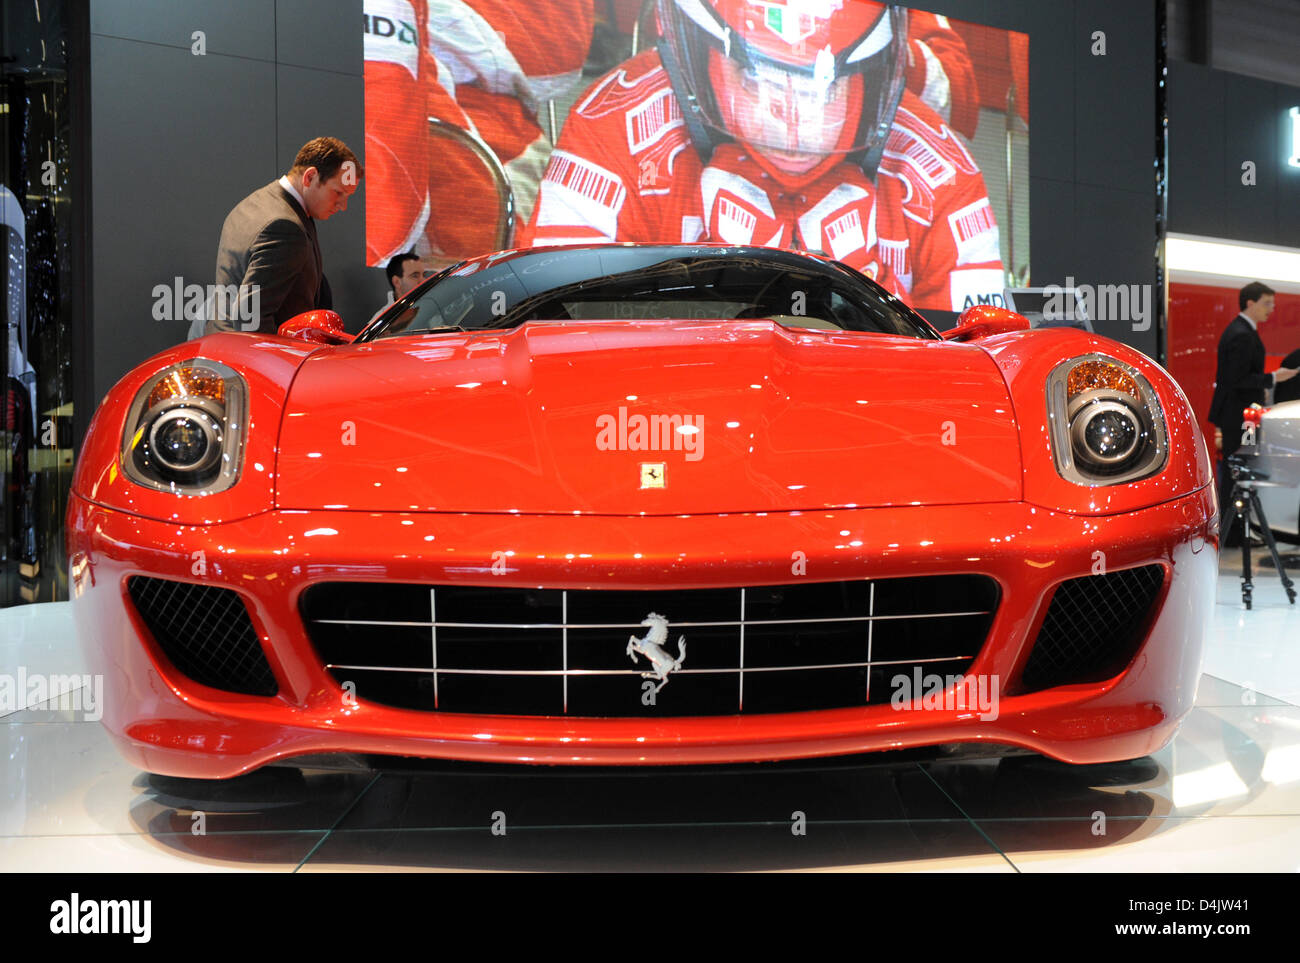 A Ferrari 599 GTB Fiorano is pictured on the second press day of the 79th International Motor Show and Accessories in Geneva, Switzerland, 04 March 2009. Exhibitors present their latest innovations as of 05 March throughout 15 March. Photo: ULI DECK Stock Photo